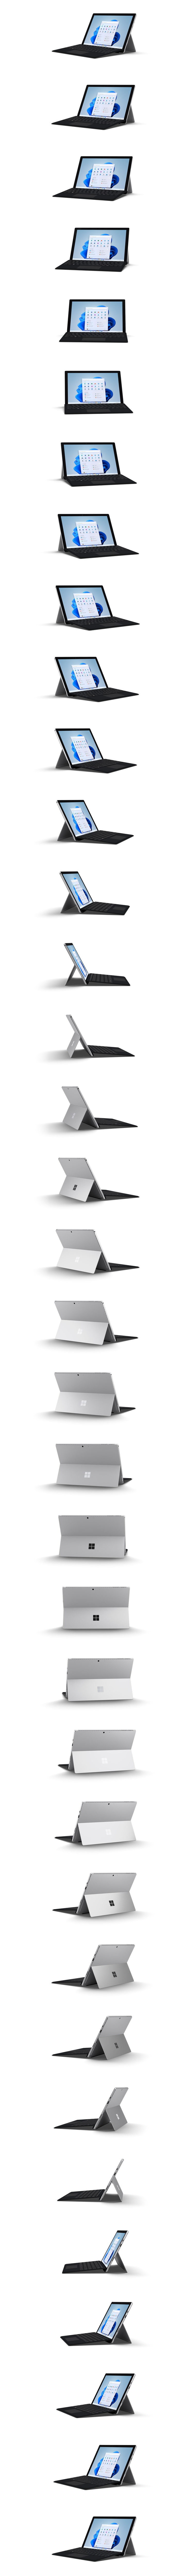 Surface Pro 7+ shown in a 360 degree rotation.